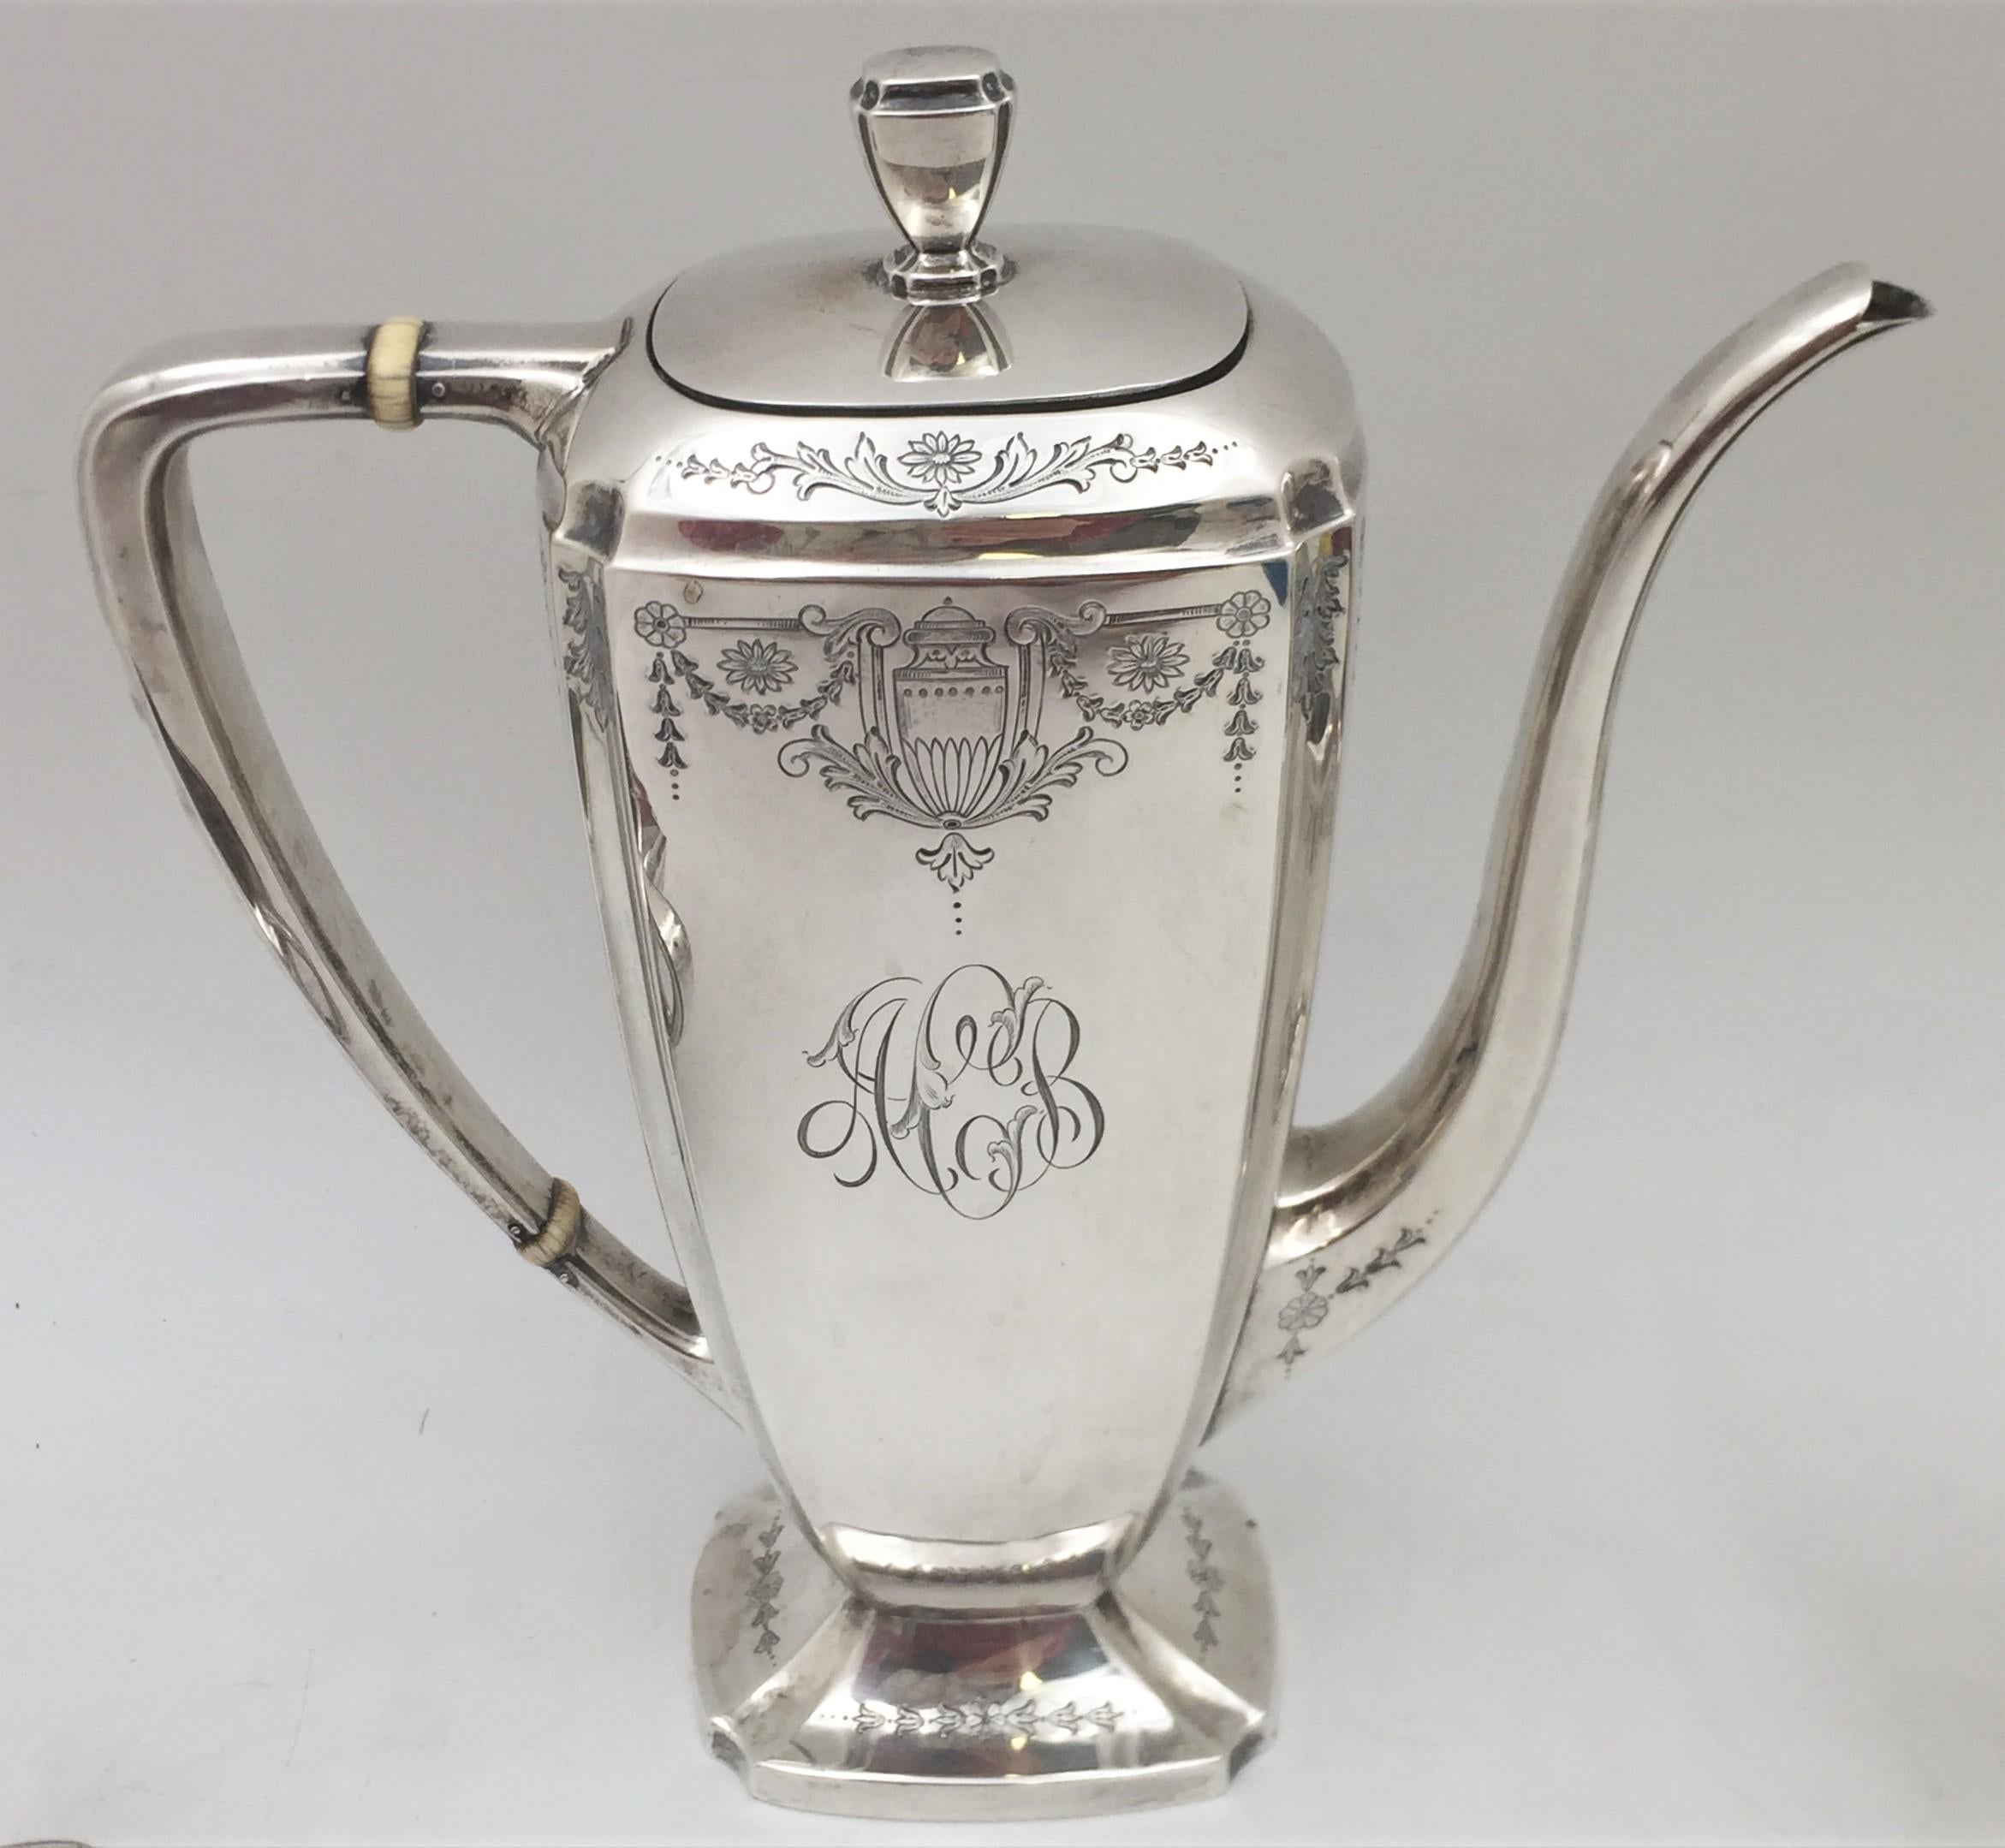 Wallace, sterling silver 3-piece coffee set, in pattern number 8479, with fine, detailed motifs of flower and urns consisting of:

- a coffee pot measuring 8 2/3